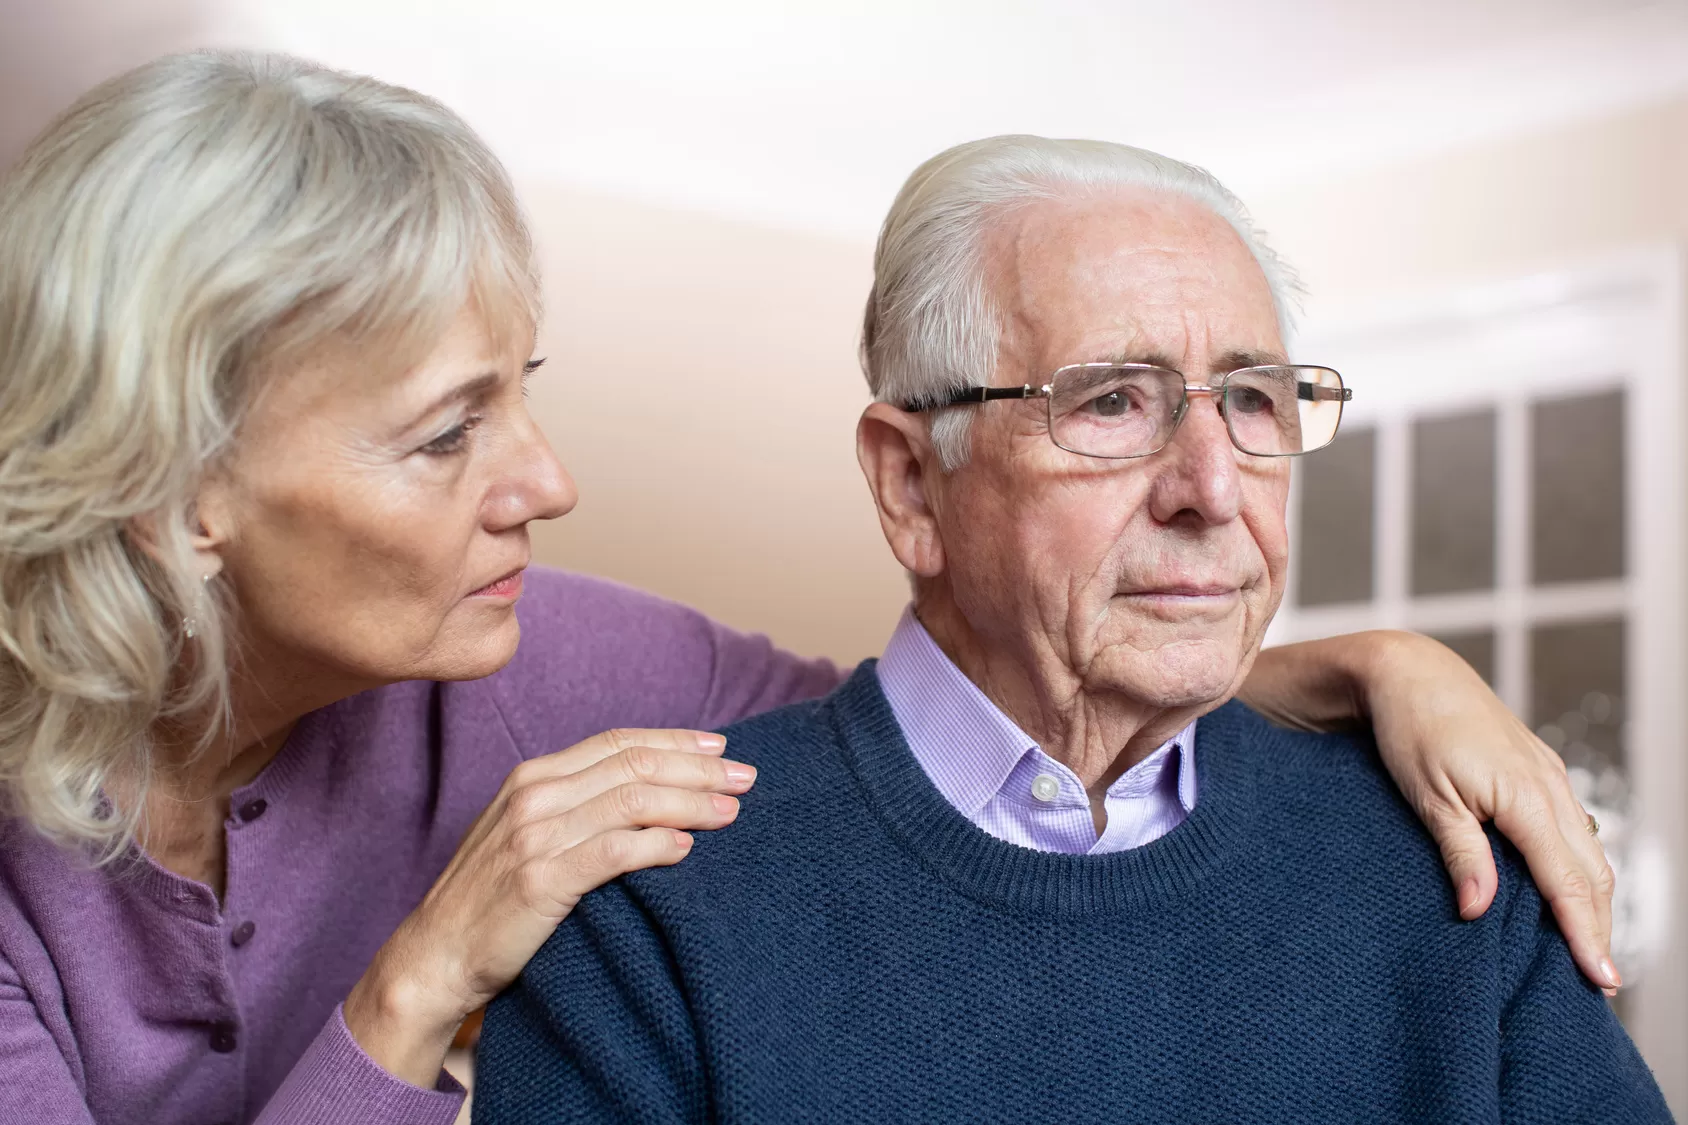 Elderly couple sitting together. Woman has her arms around a worried senior man